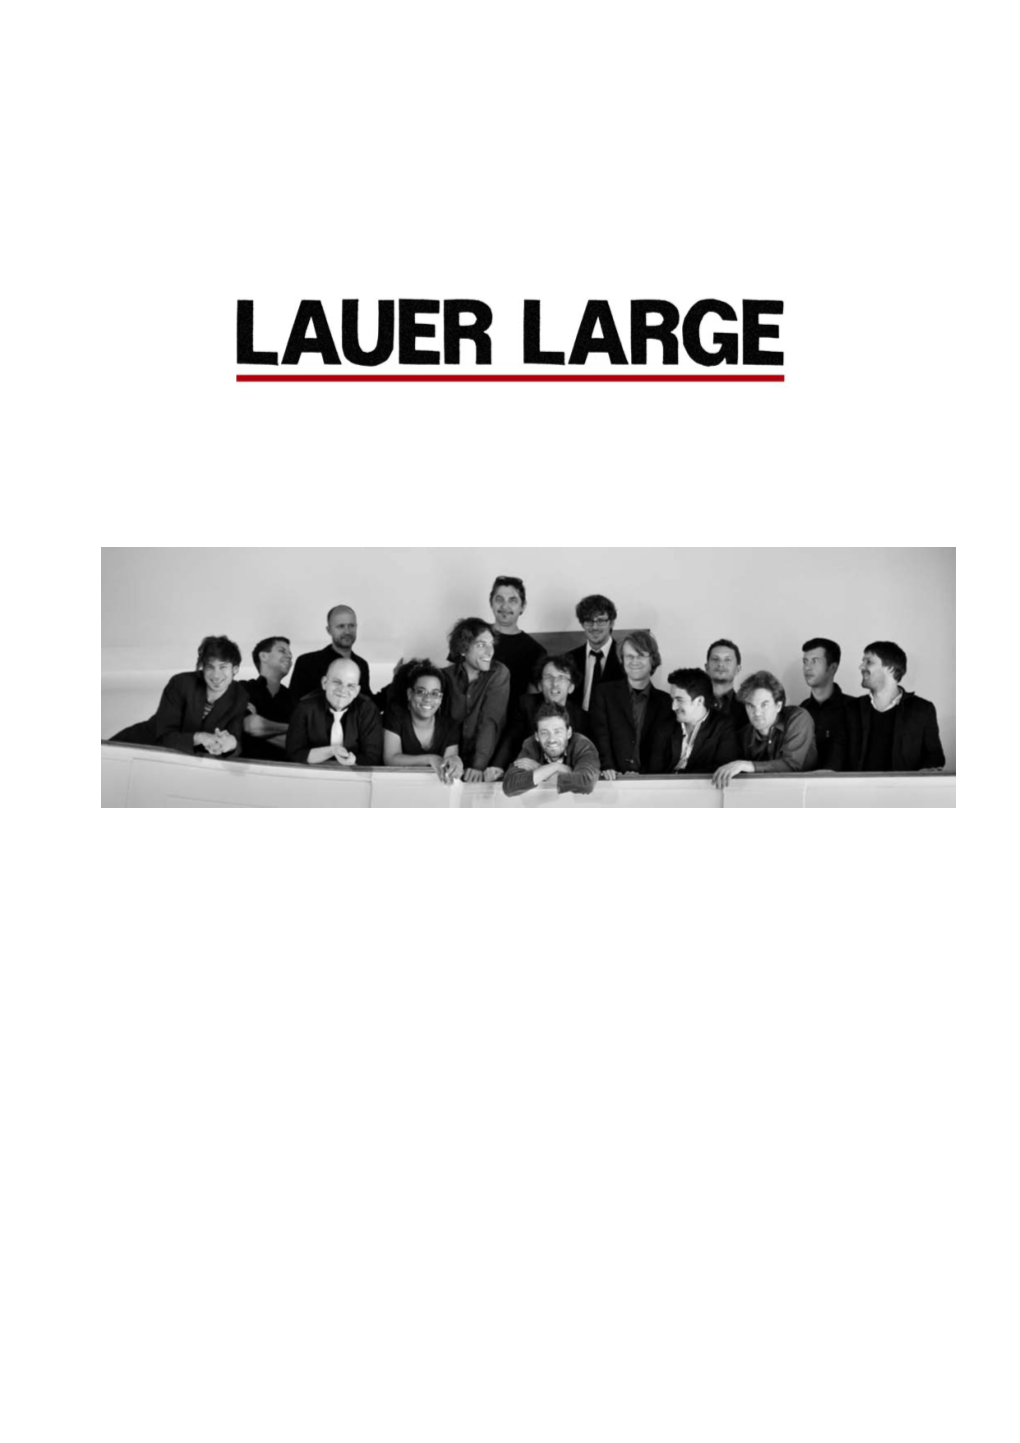 Lauer Large Is Not the Sum Total of Its Individual Members’ Talents; It Is a Homogenous Entity